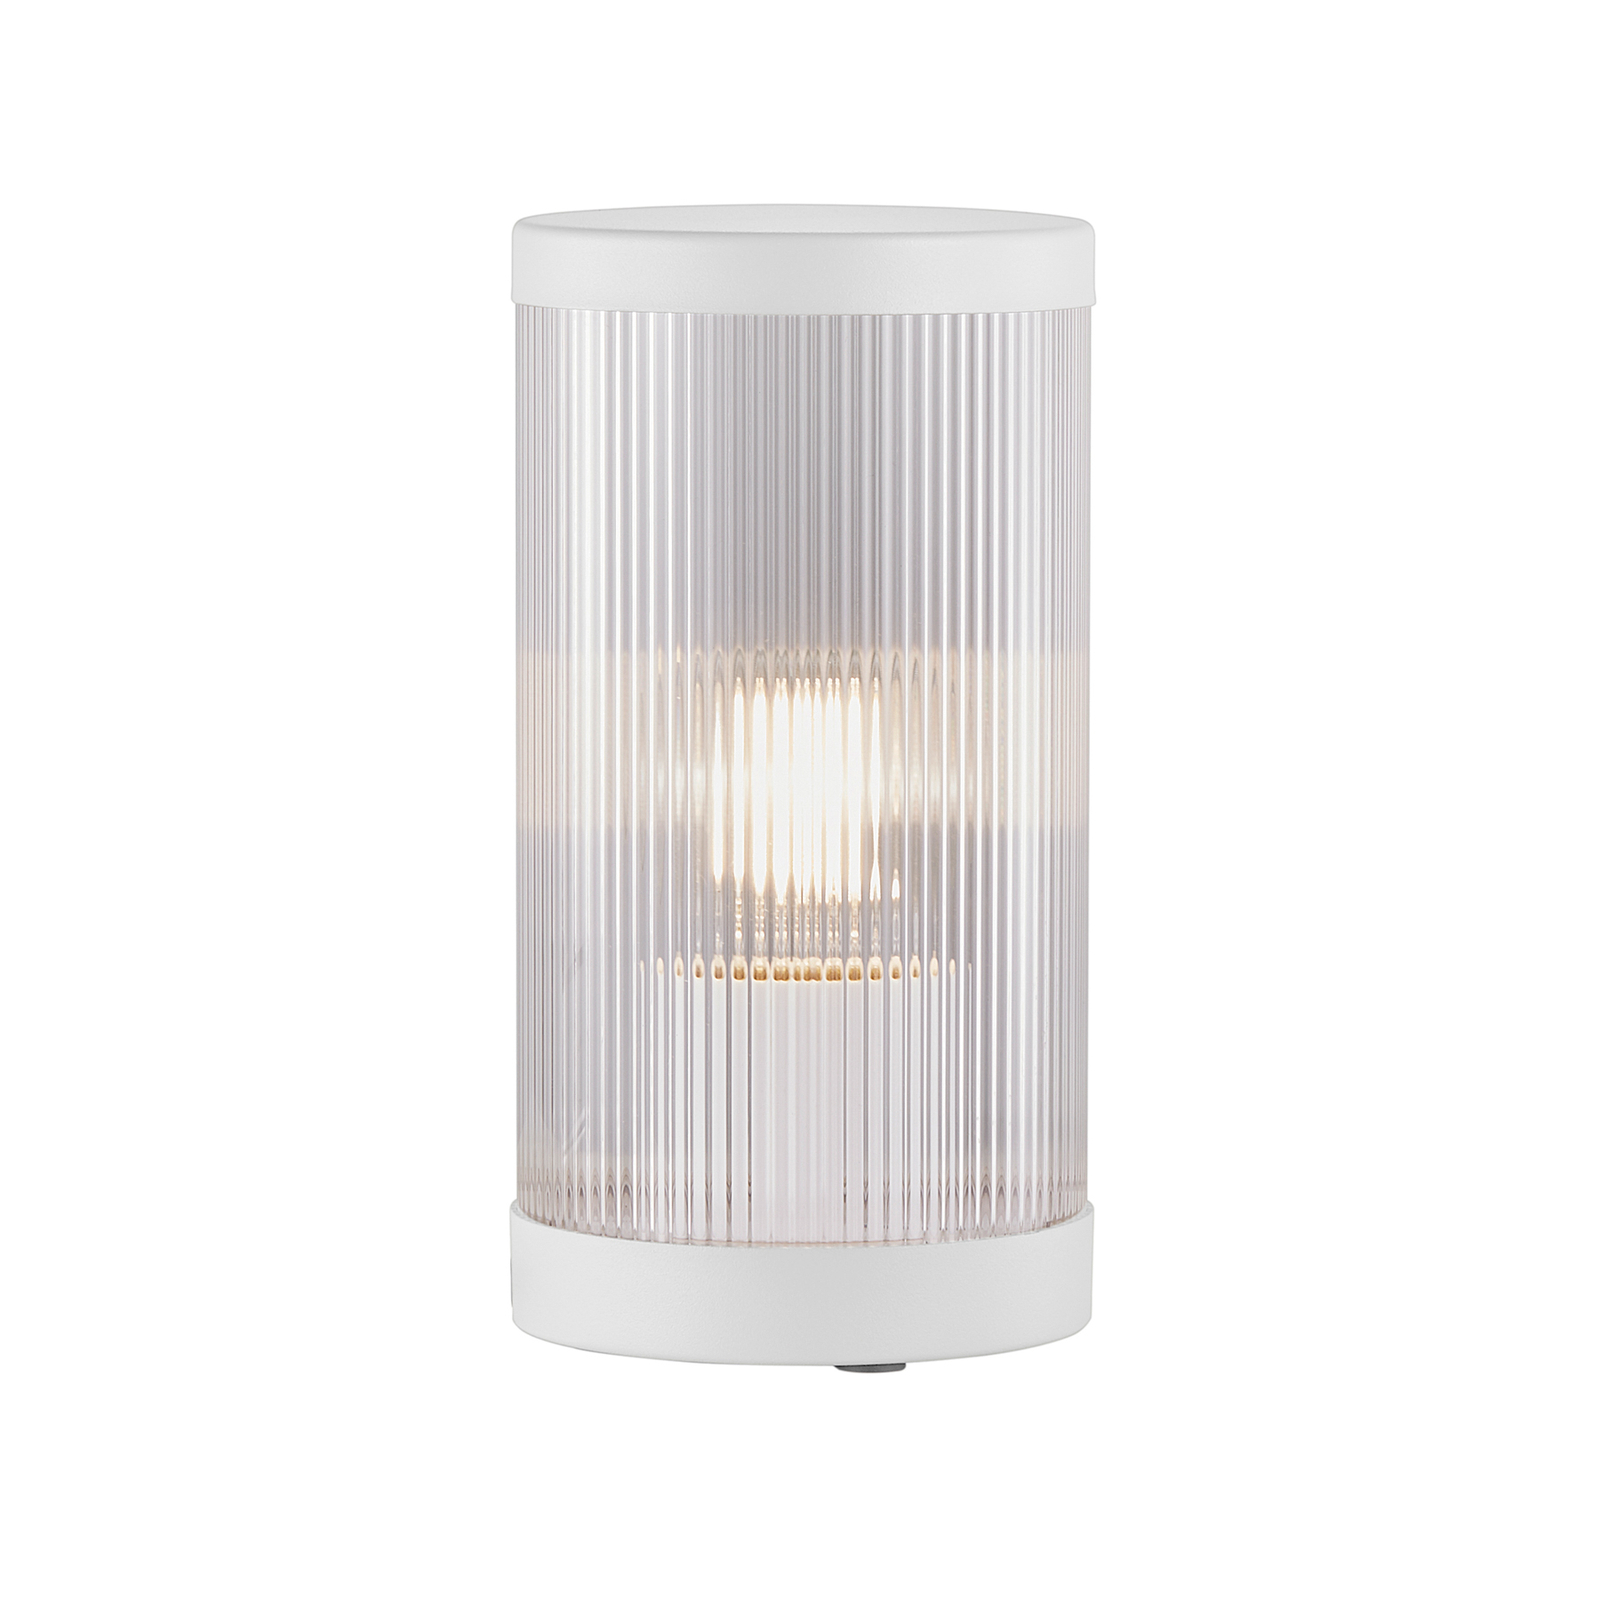 Coupar table lamp for outdoor use, white